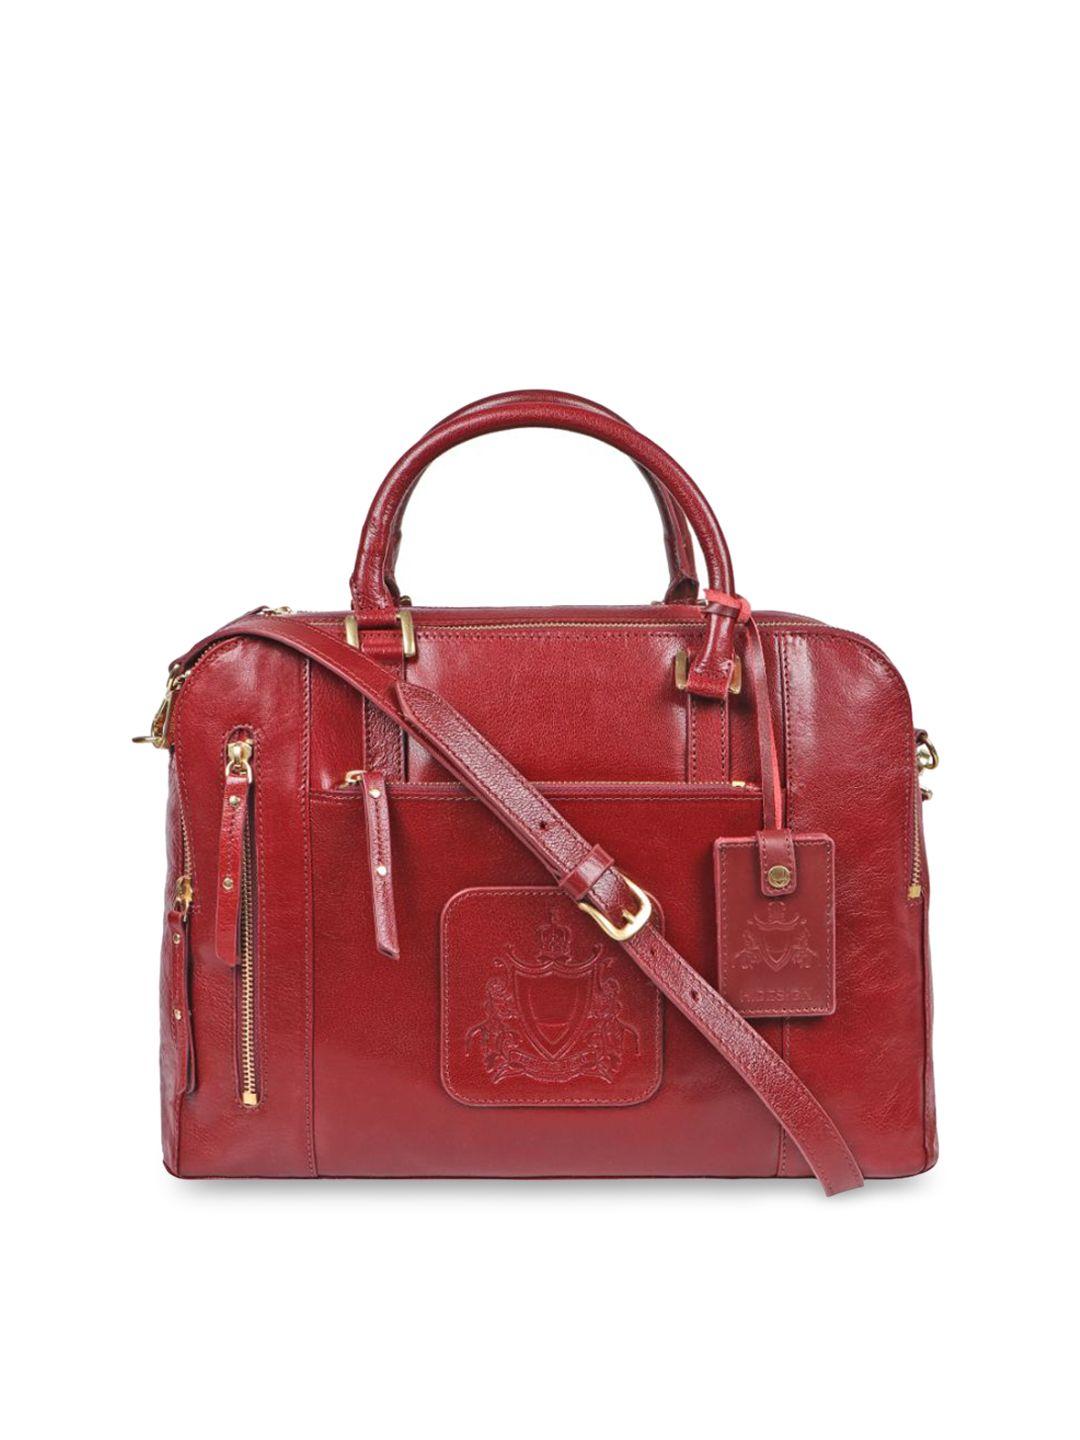 hidesign red textured leather structured handheld bag